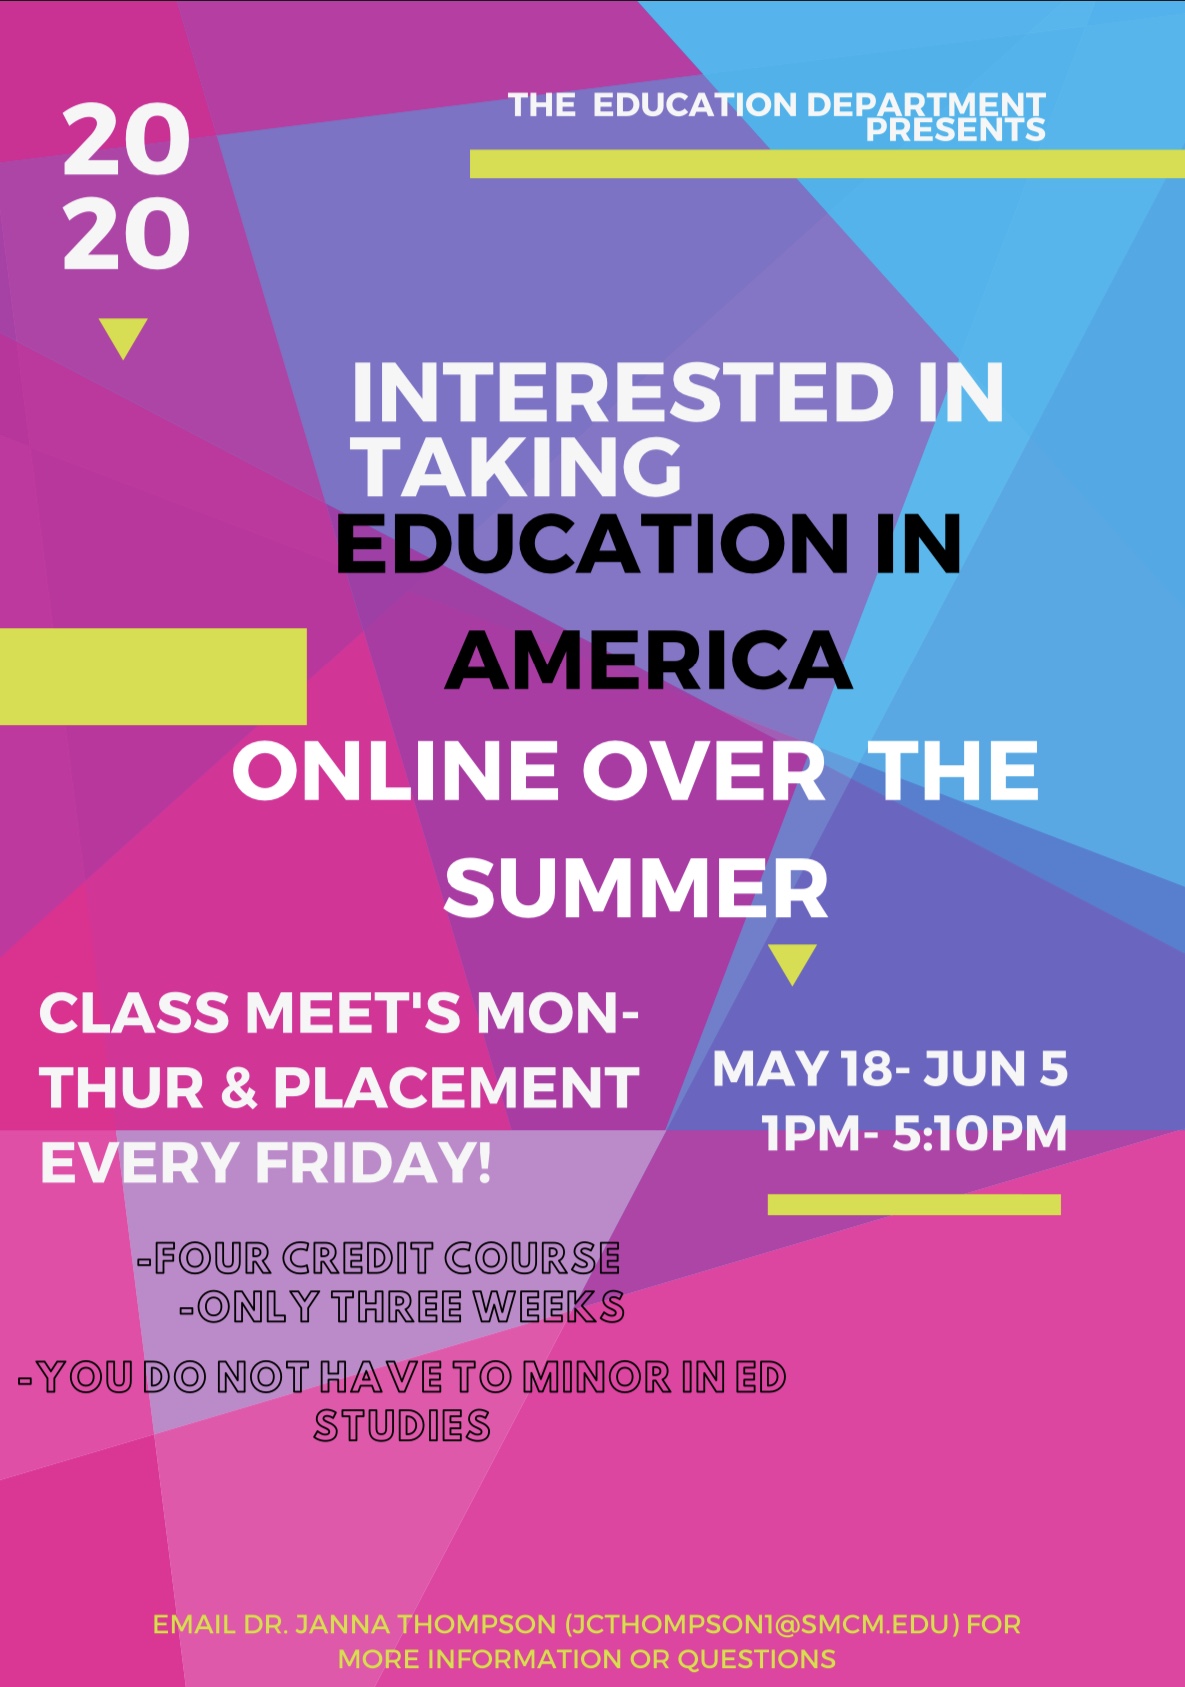 NEW ONLINE SUMMER COURSE  Education in America (EDUC 206) Only 3 Weeks: May 18-June 5, 1-5pm Monday-Thursday, Fridays Virtual Placement Excellent for Course for ALL Students...You don’t have to be an education minor!!!!